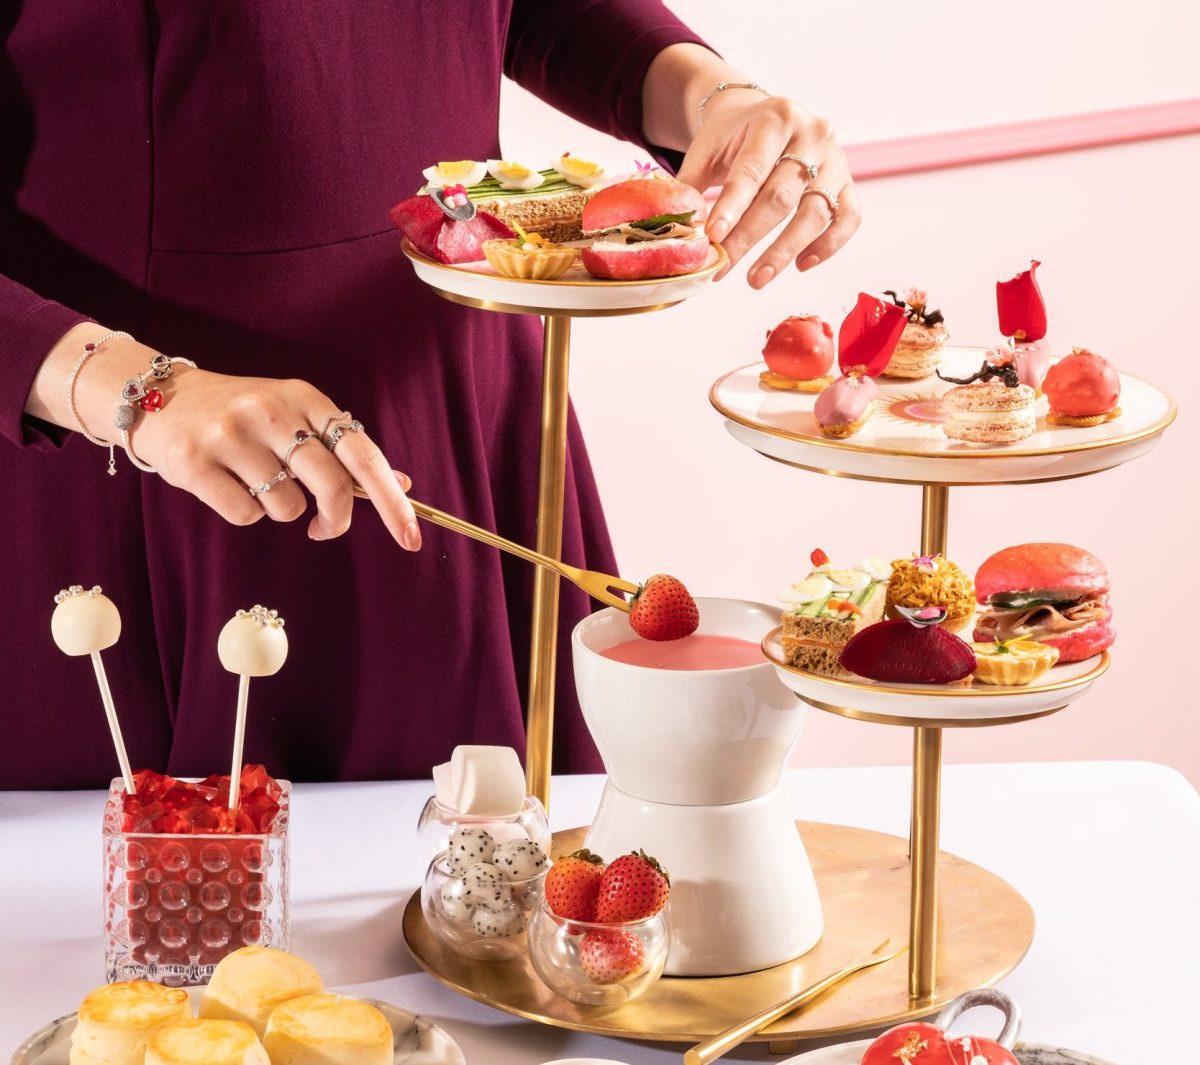 Anantara Siam Bangkok Collaborates with Pandora Jewellery and Prince's Collection for New Afternoon Tea Experience Celebrating the Power of